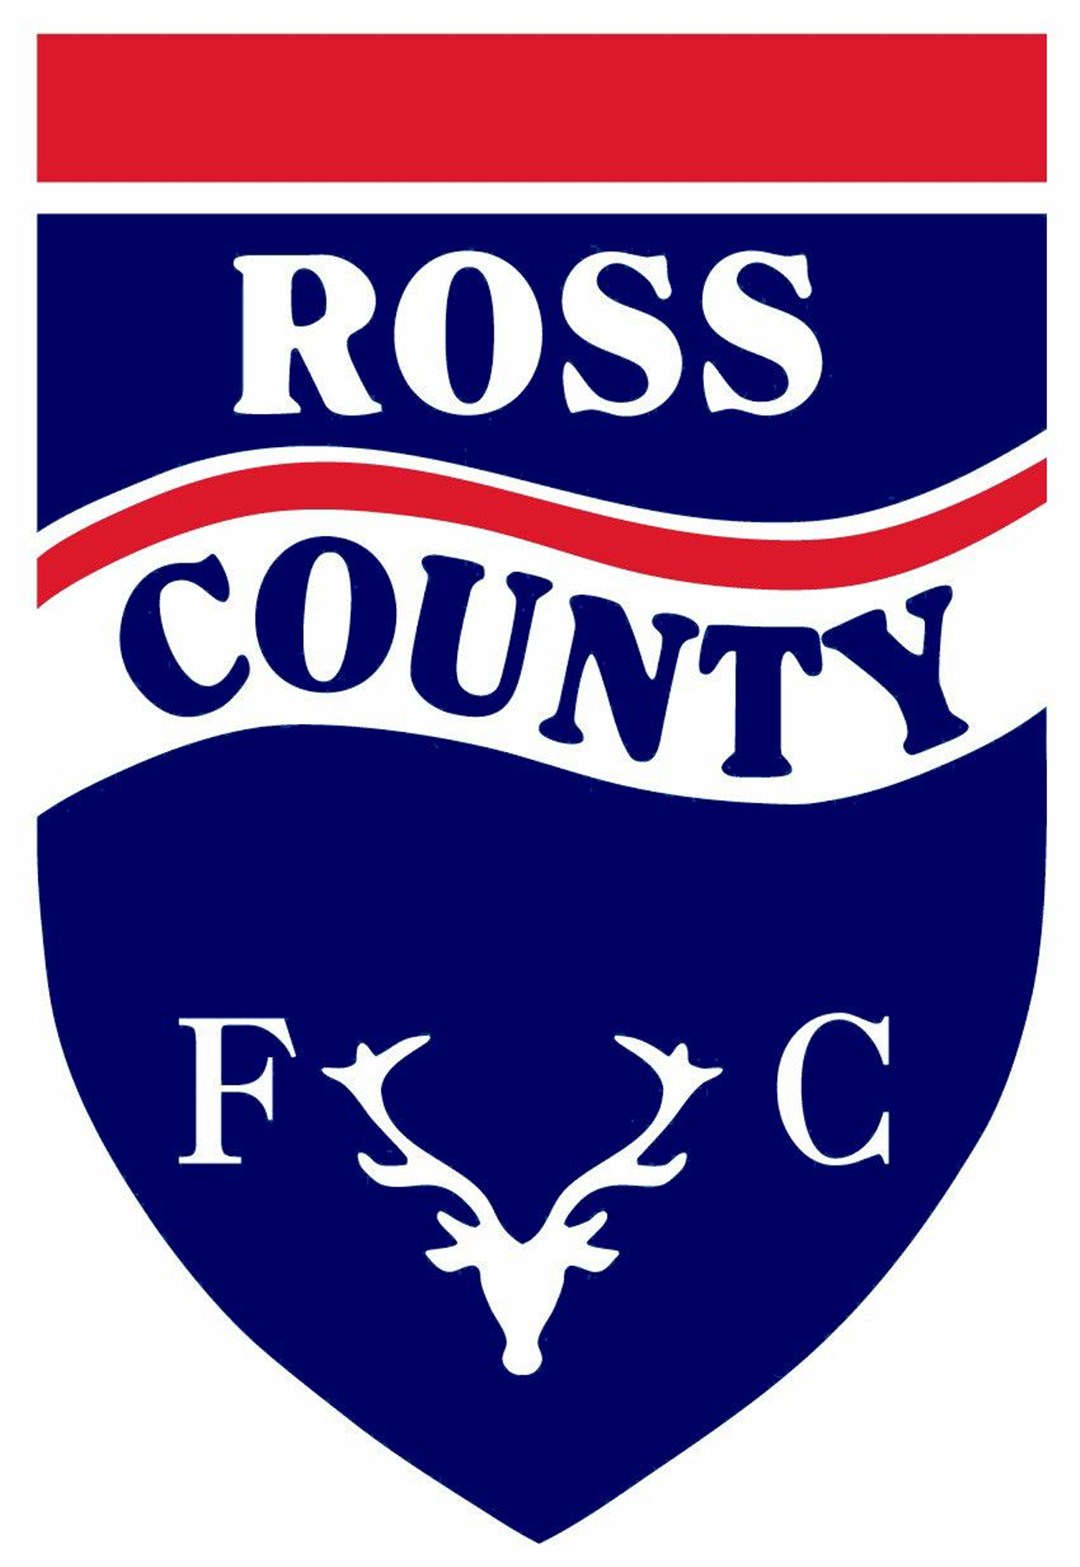 Ross County take on Dundee United at 3pm.